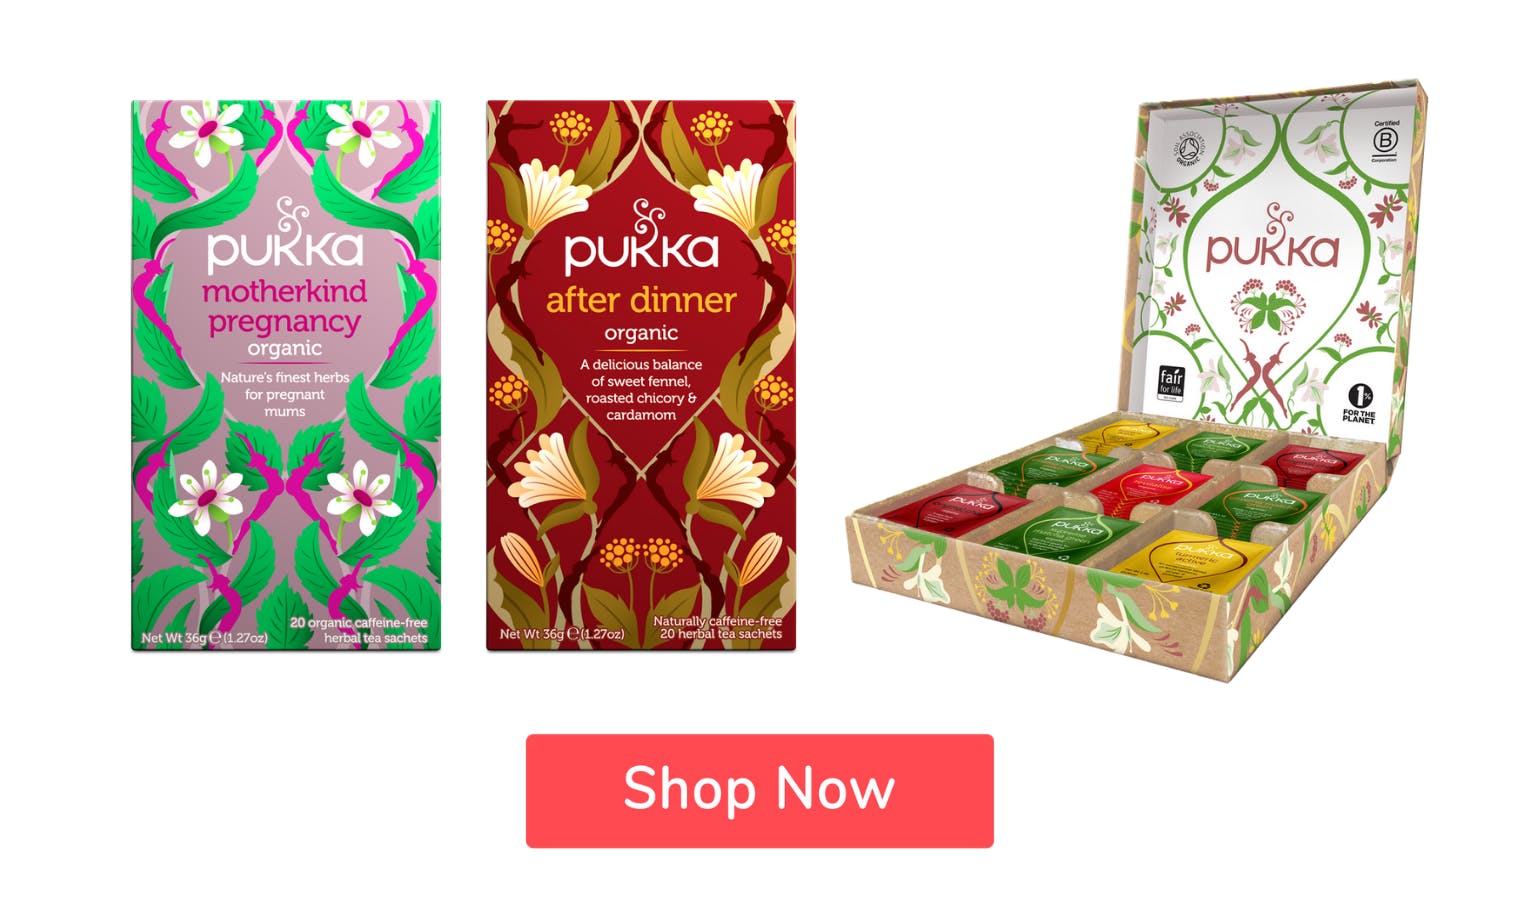 pukka tea products with button ‘shop now’